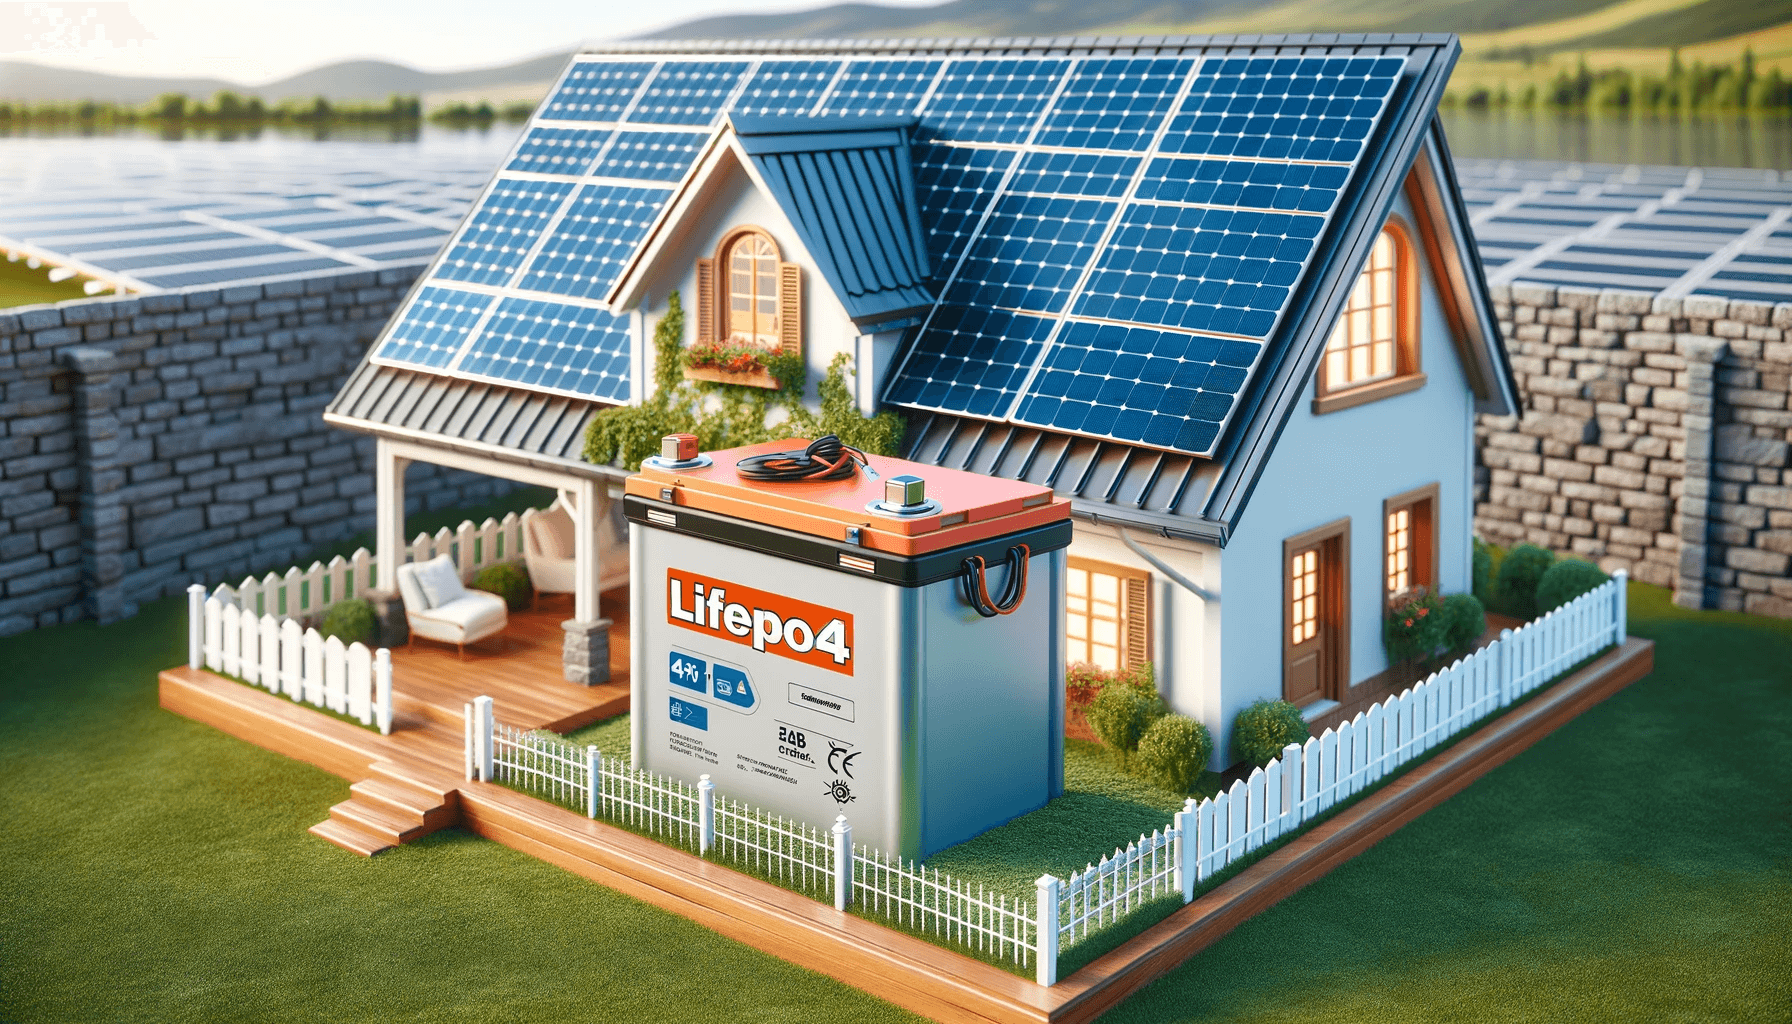 A home solar panel setup with a 48V LiFePO4 battery clearly visible, showcasing its use in residential energy storage systems